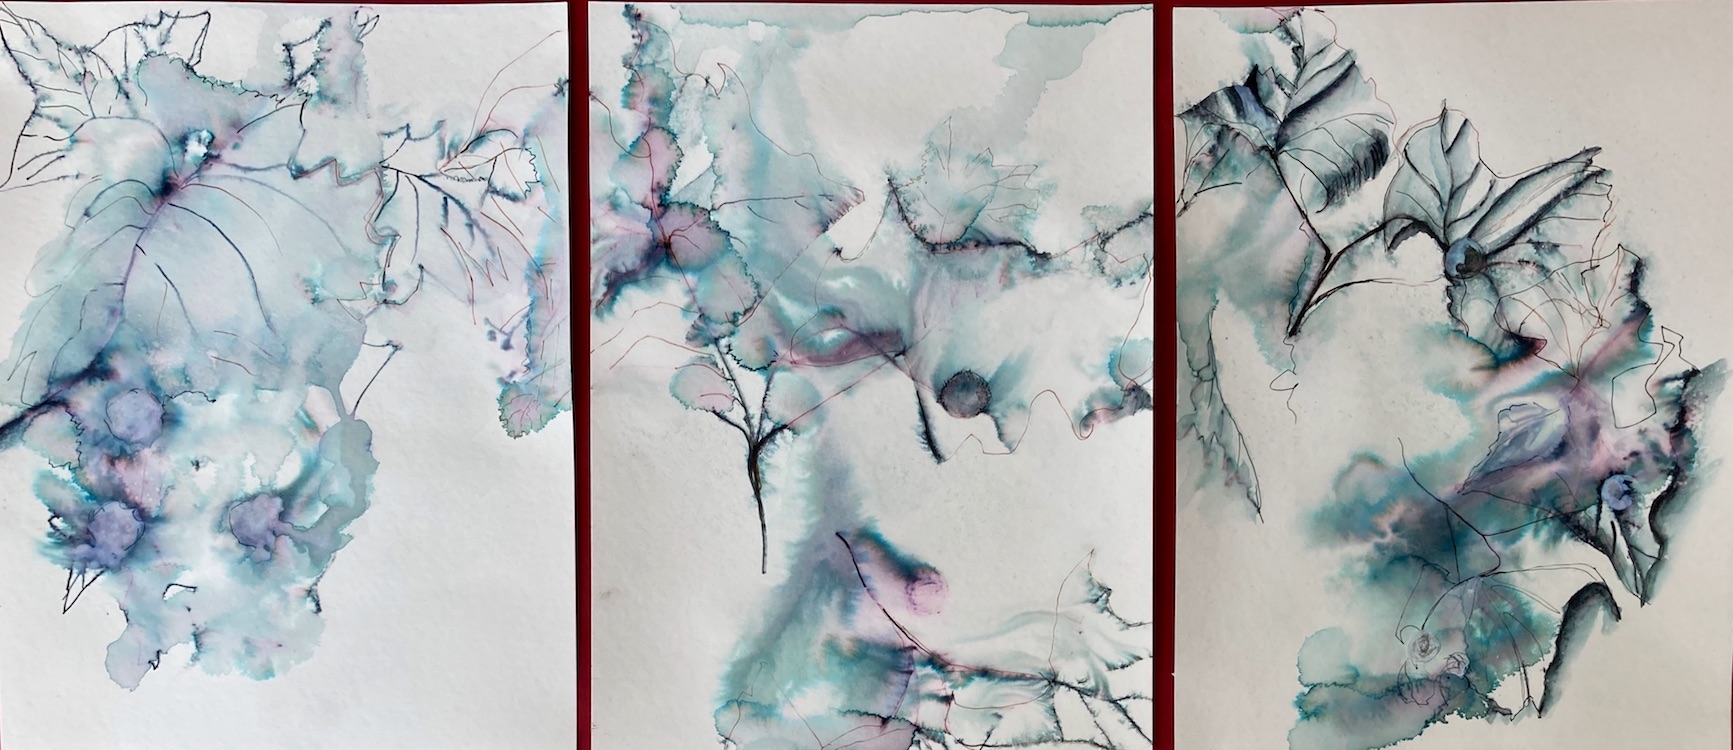 Sycamore (Triptych)